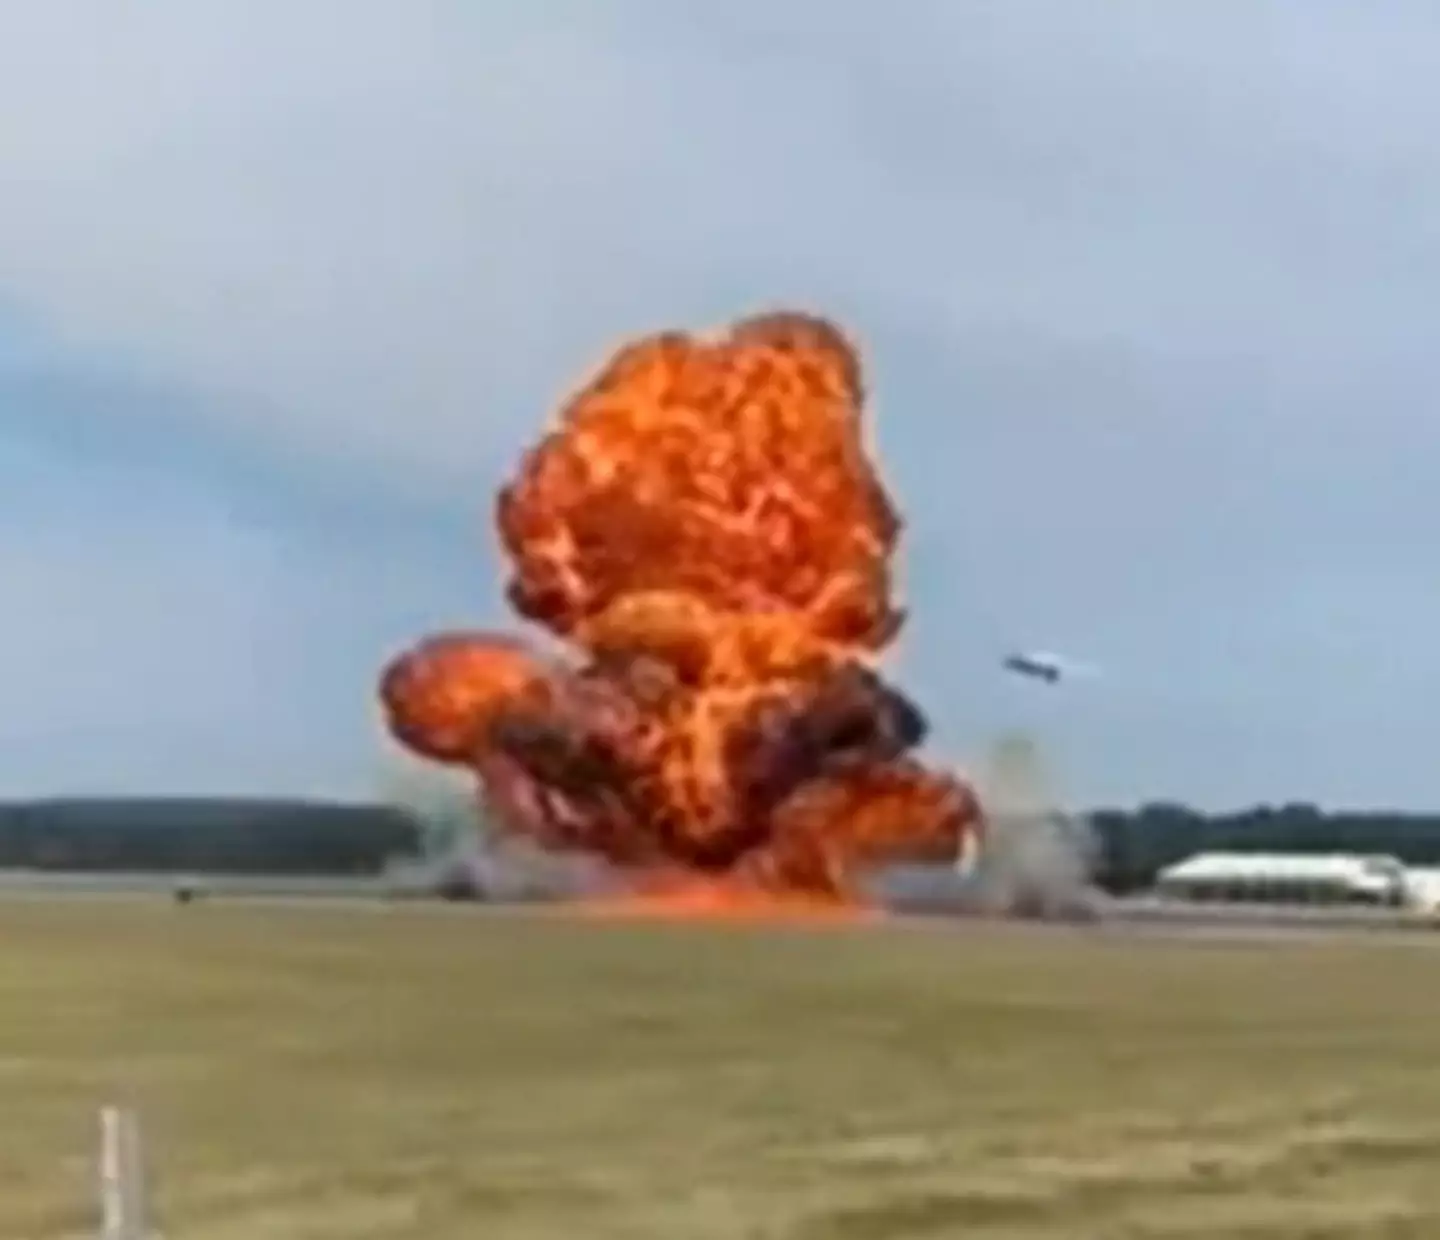 Upon releasing his parachute, Darnell's jet truck tragically exploded in flames.